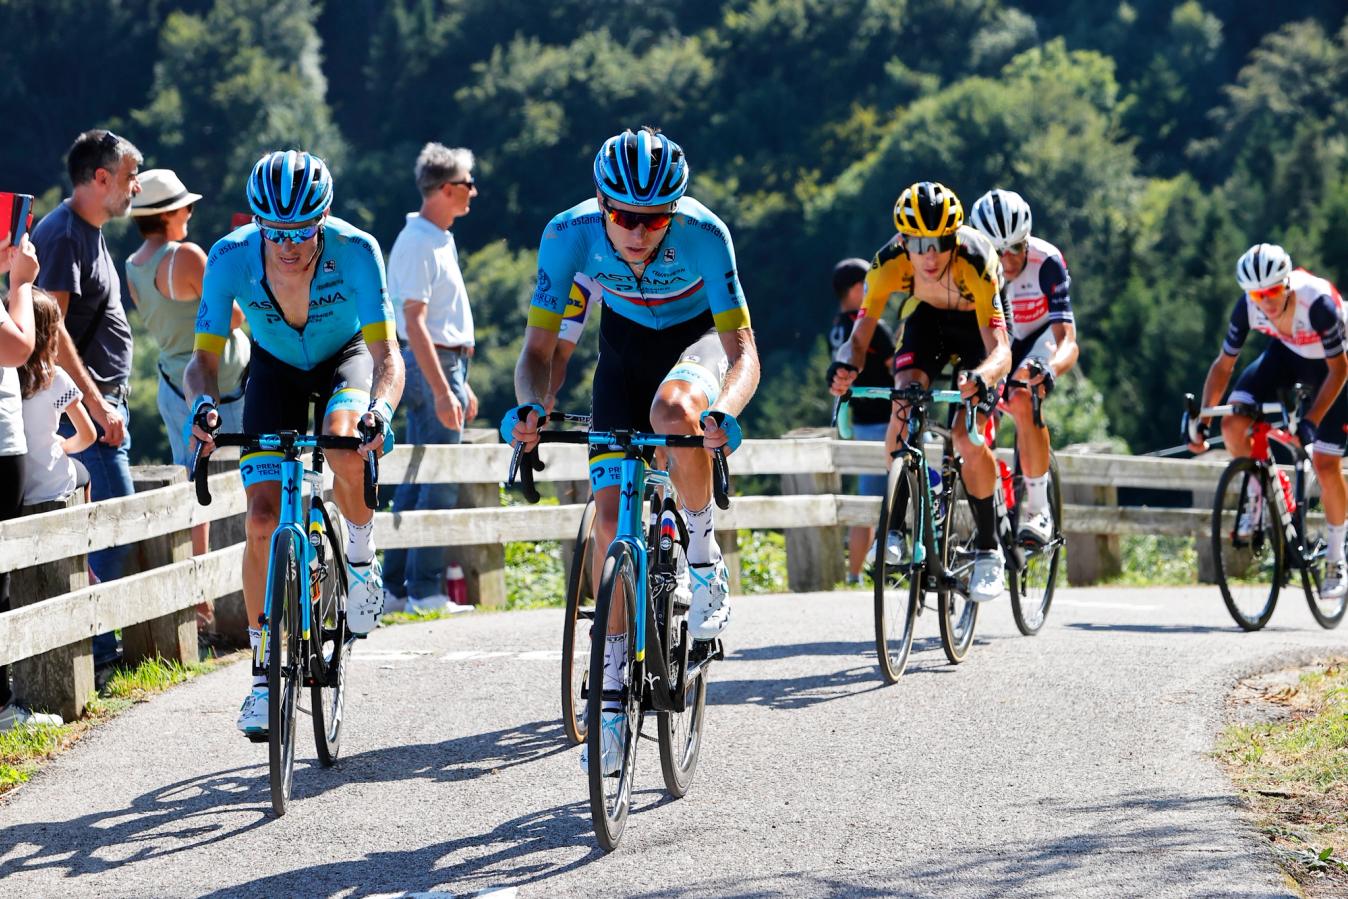 The Muro di Sormano is one of the most feared climbs in all of cycling